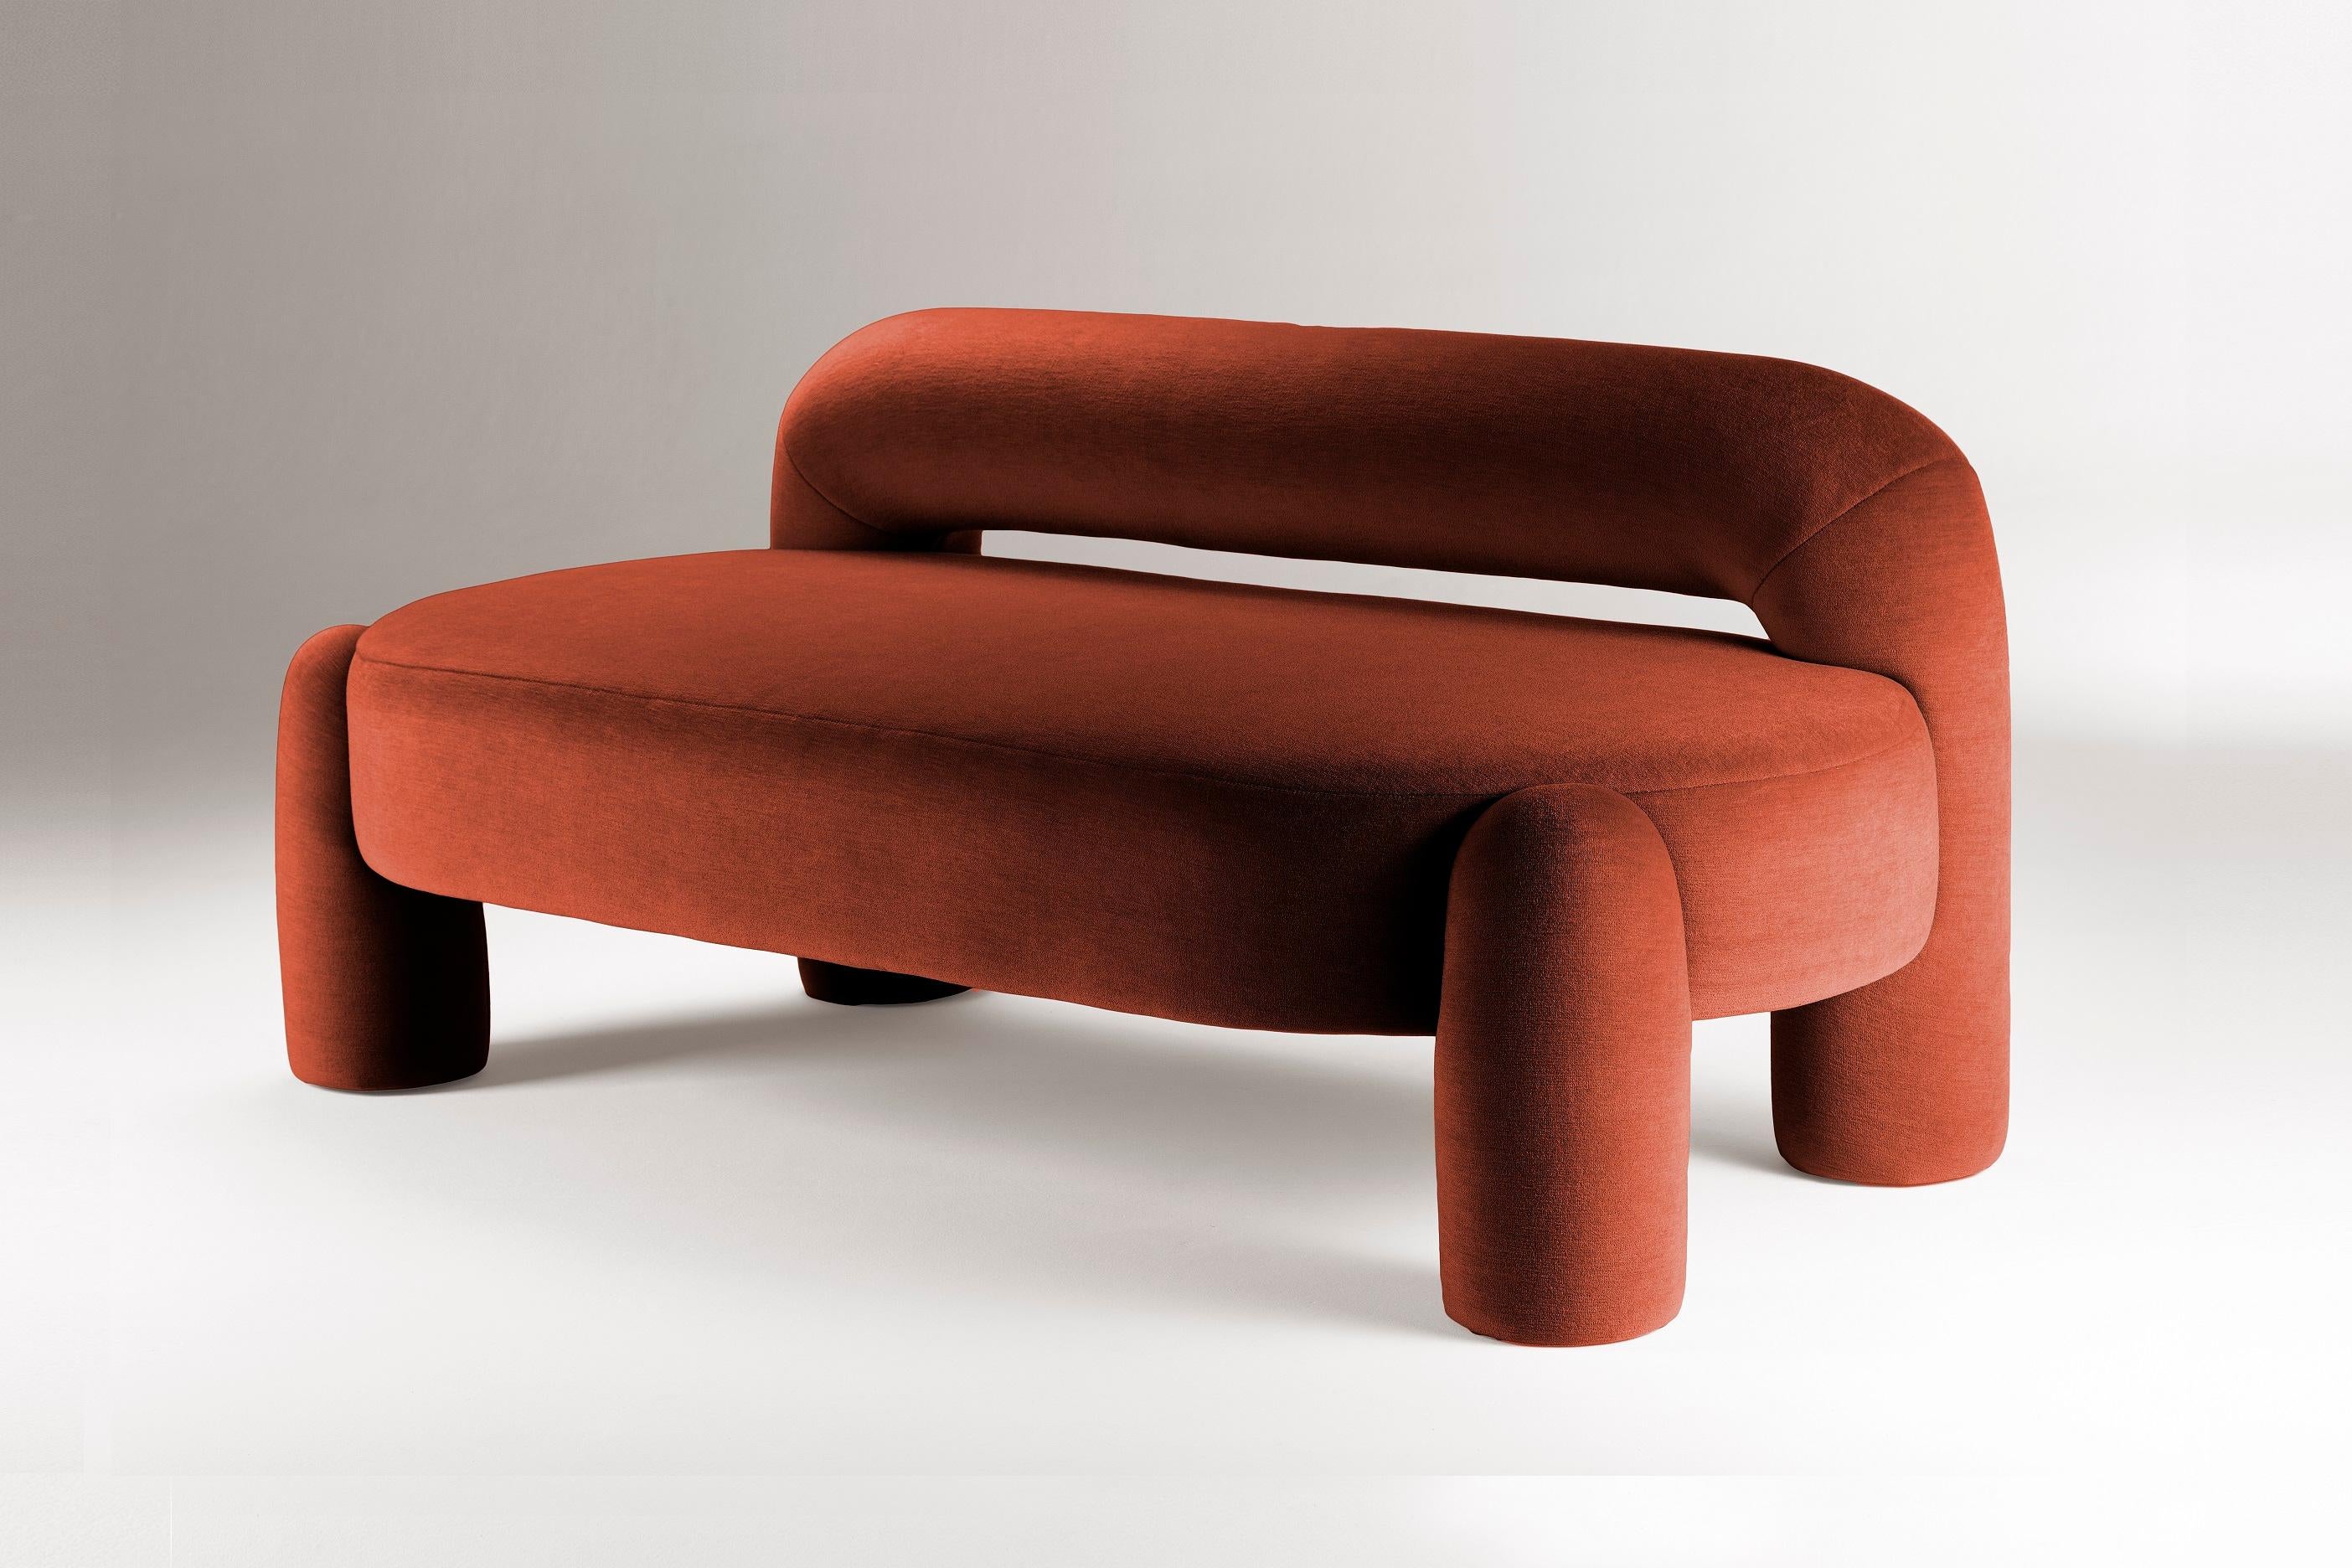 When pure geometry meets soft curves, something sculptural and sensual comes out. A fine dialogue between oversized legs and clean lines takes place in this piece upholstered in mohair velvet. Marlon is edgy and elegant at the same time, letting the